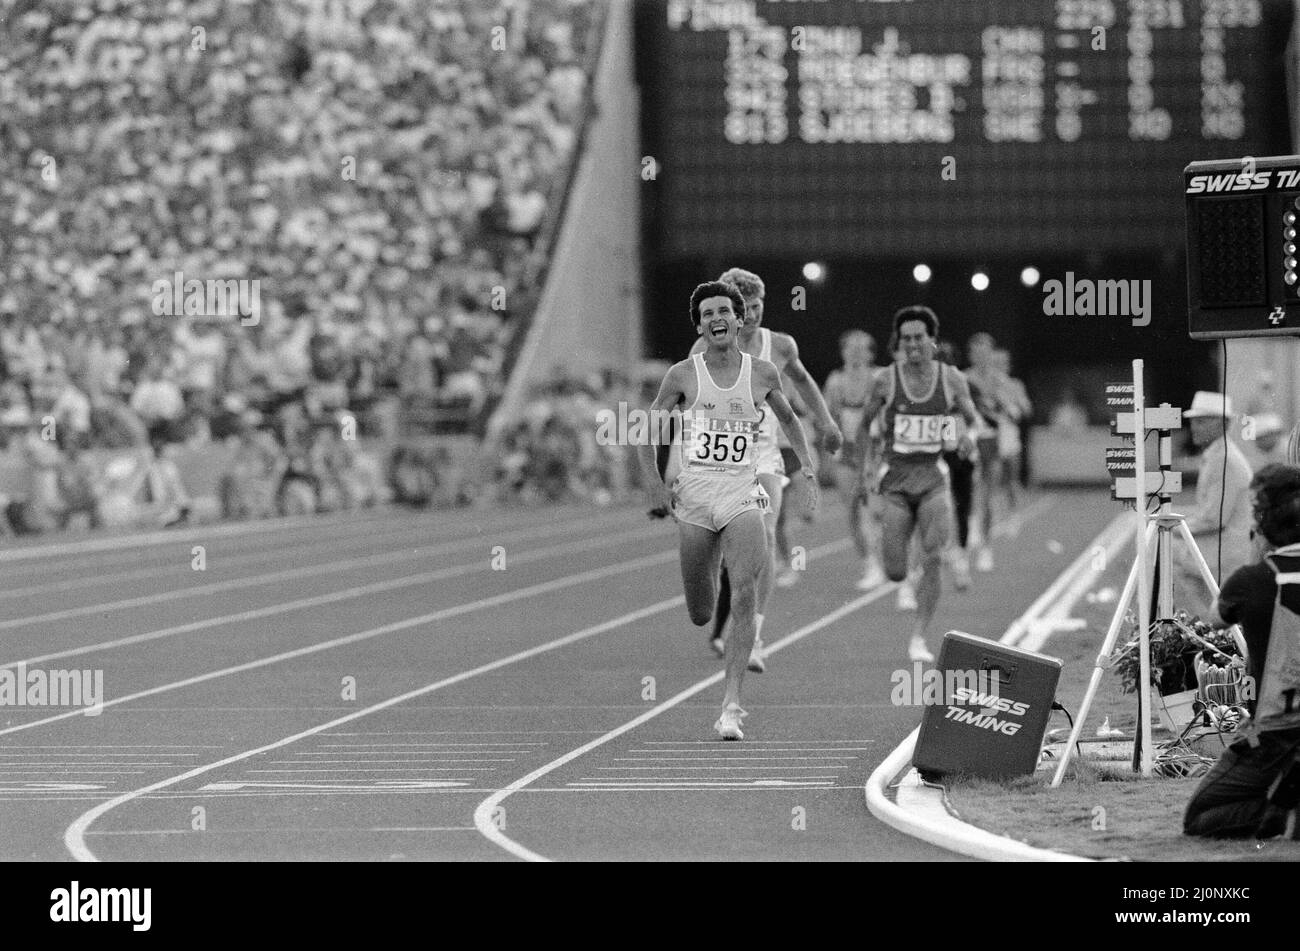 1984 Olympic Games in Los Angeles, USA.Mens Athletics. Great Britain's Sebastain Coe wins the 1500 metres gold medeal ahead of his fellow countryman Steve Cram who took silver. 11th August 1984. Stock Photo